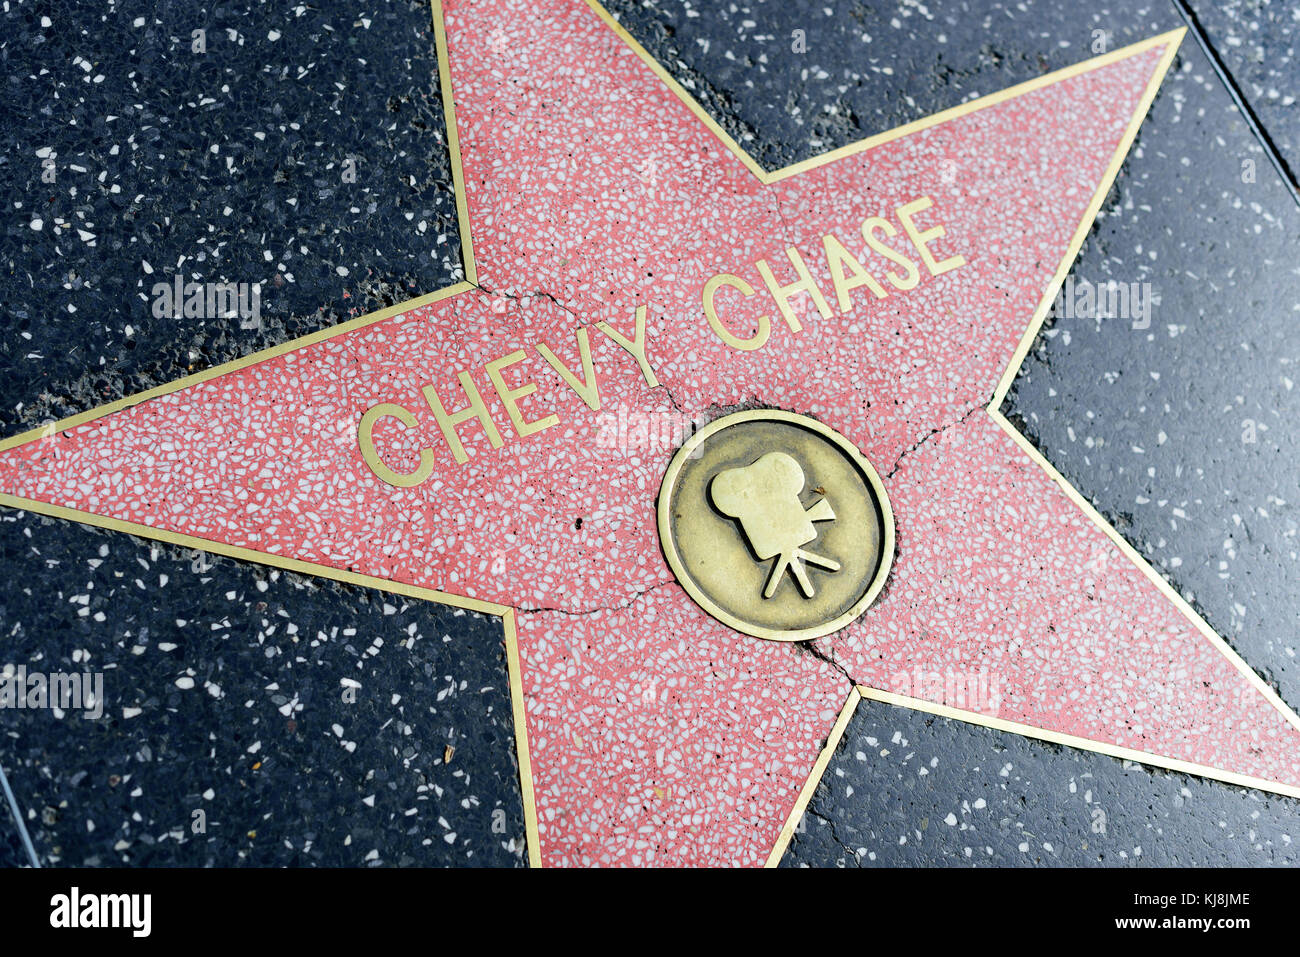 HOLLYWOOD, CA - DECEMBER 06: Chevy Chase star on the Hollywood Walk of Fame in Hollywood, California on Dec. 6, 2016. Stock Photo